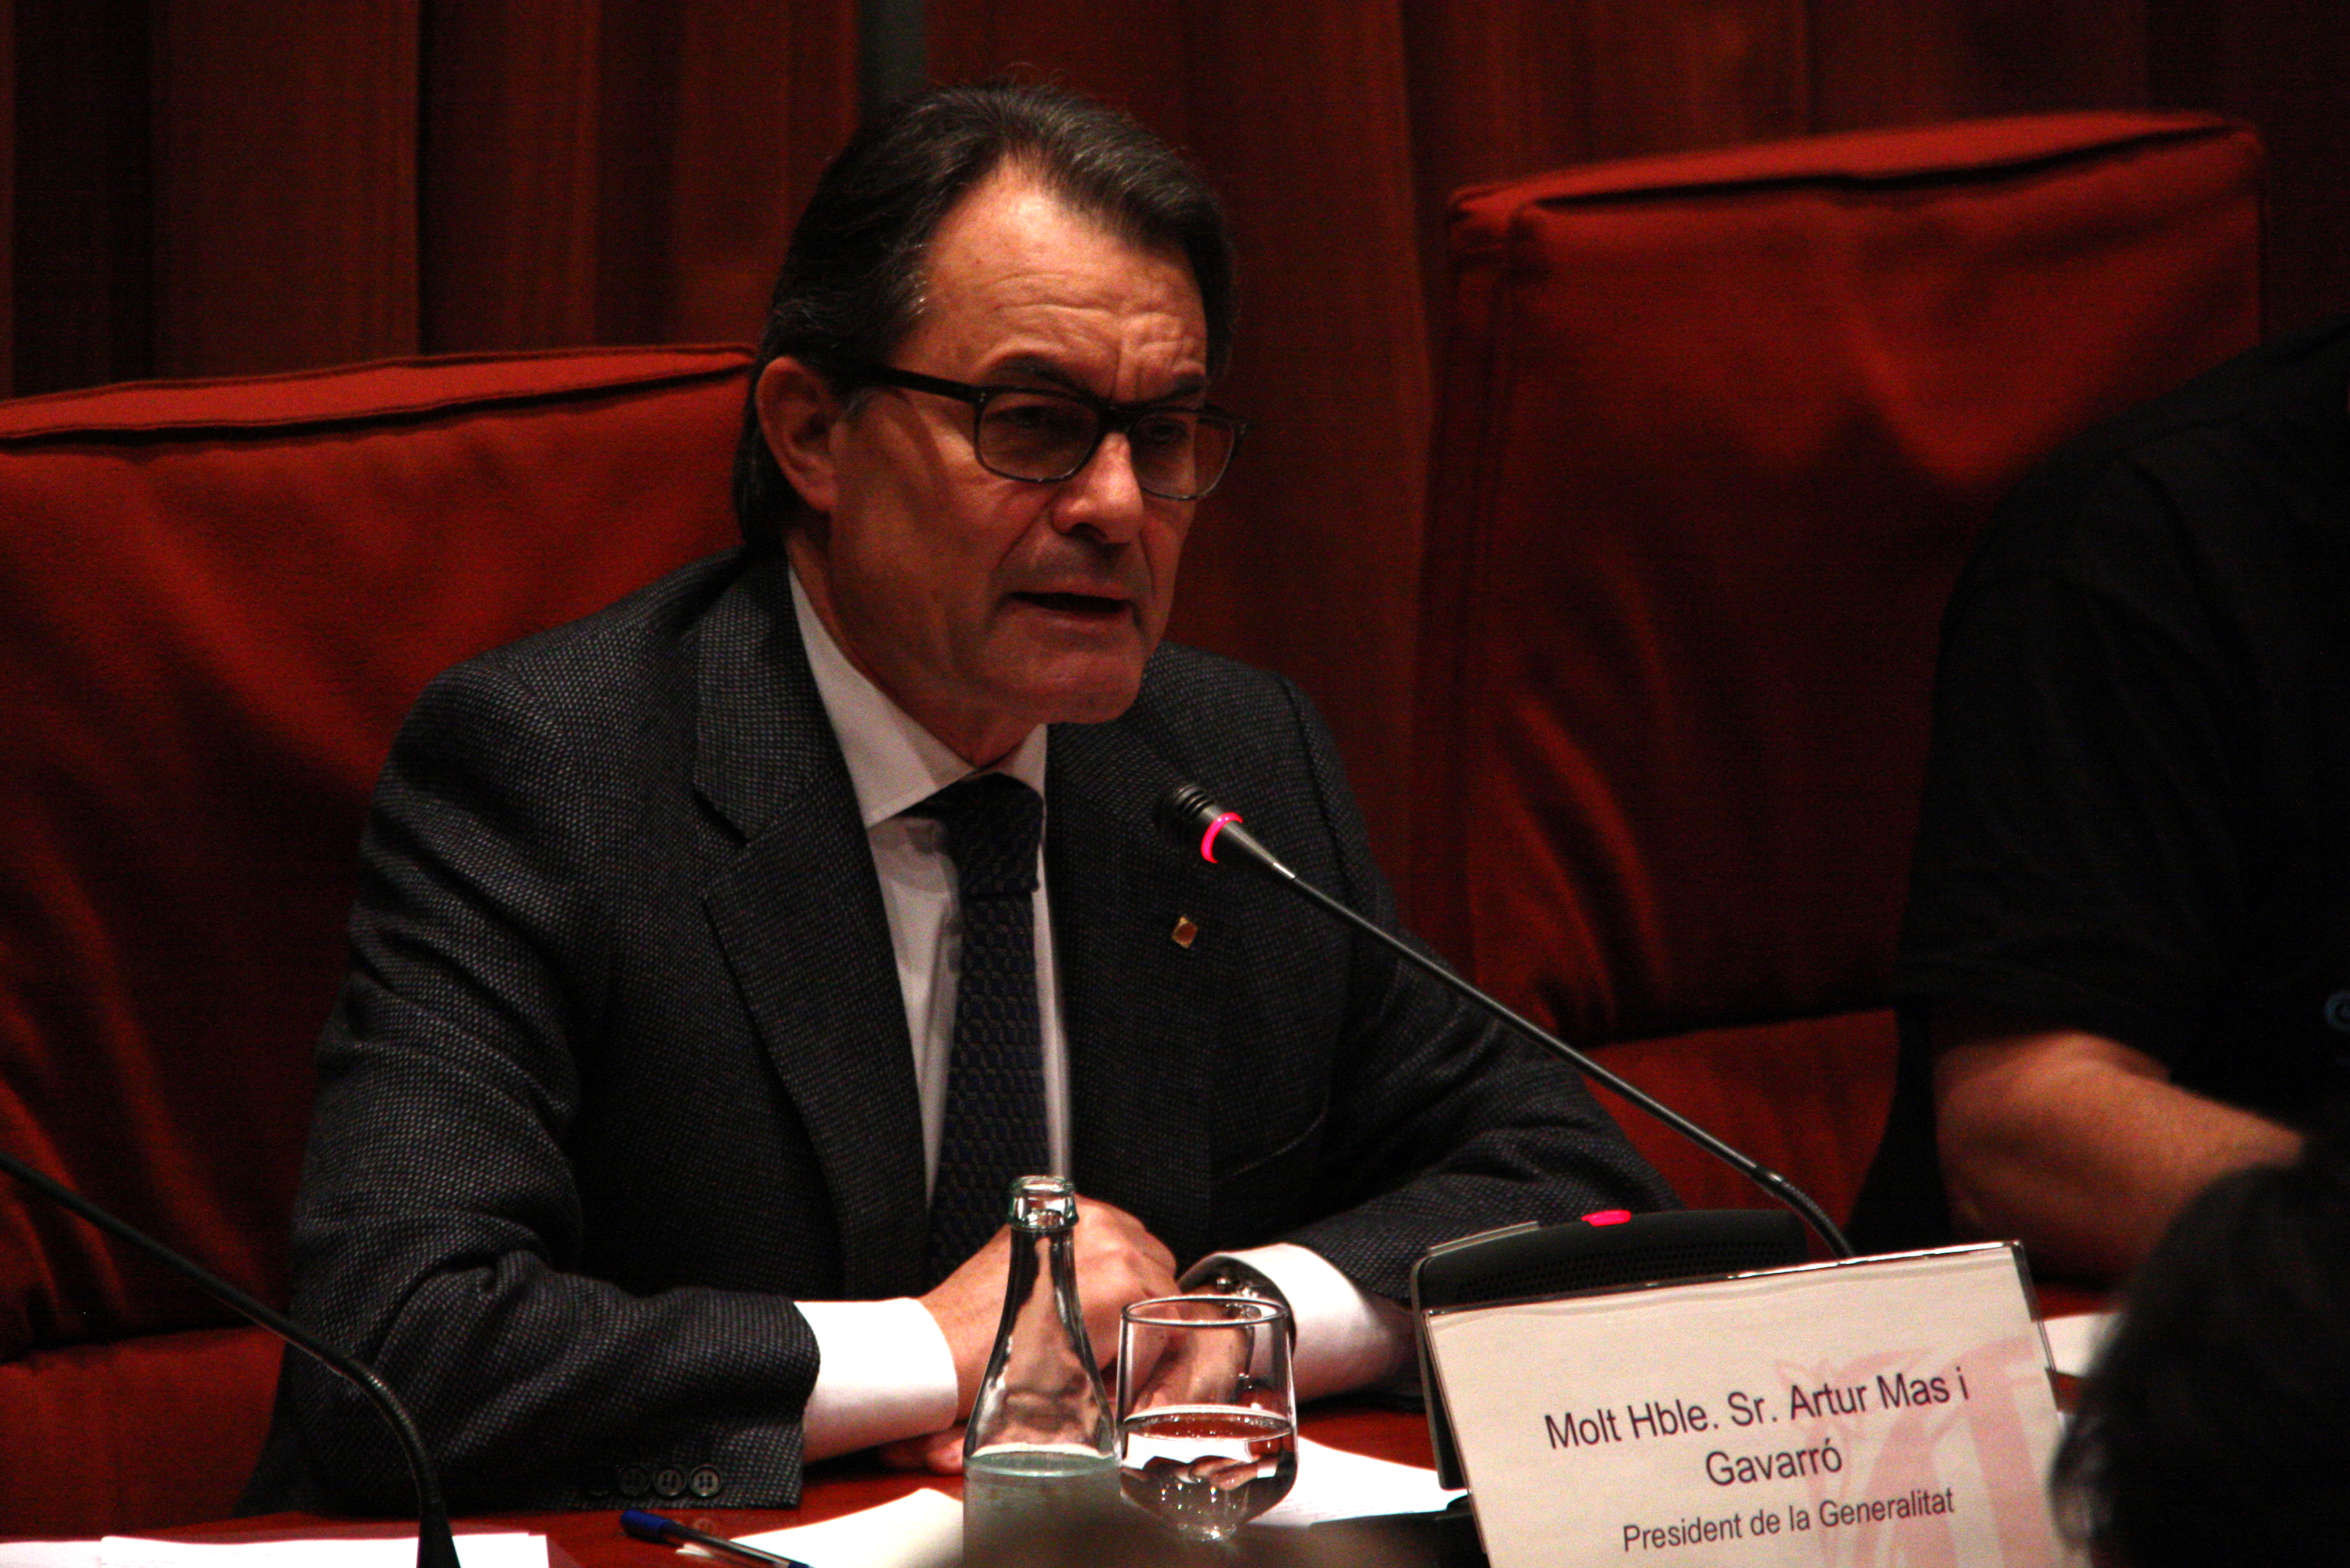 Catalan President Artur Mas appeared before the Anti-Corruption Commission (by Núria Julià)